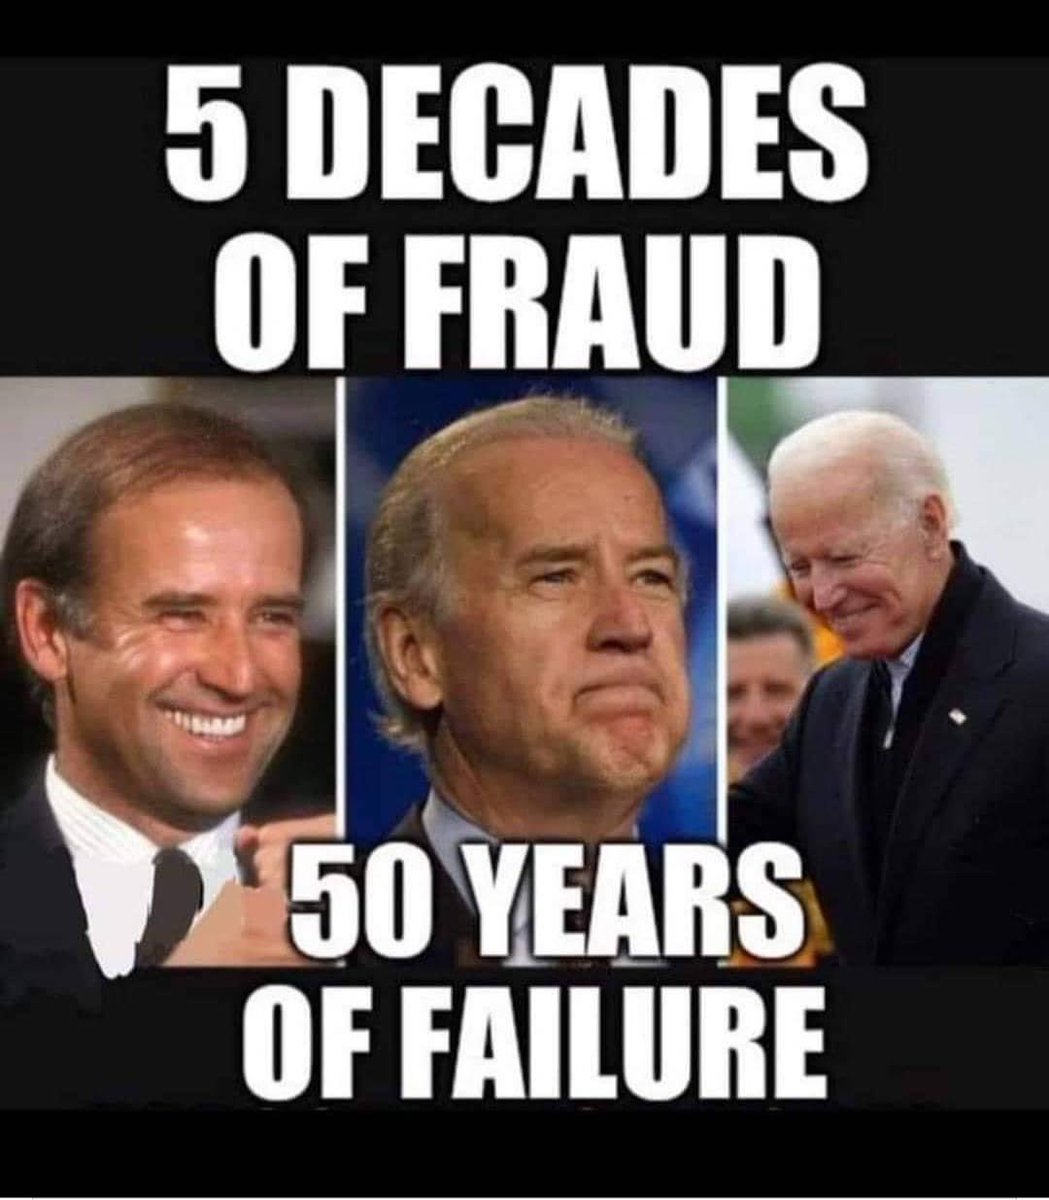 .@JoeBiden may be the most unpopular president ever and he may be losing in most polls. What are we doing to prevent election fraud and interference?